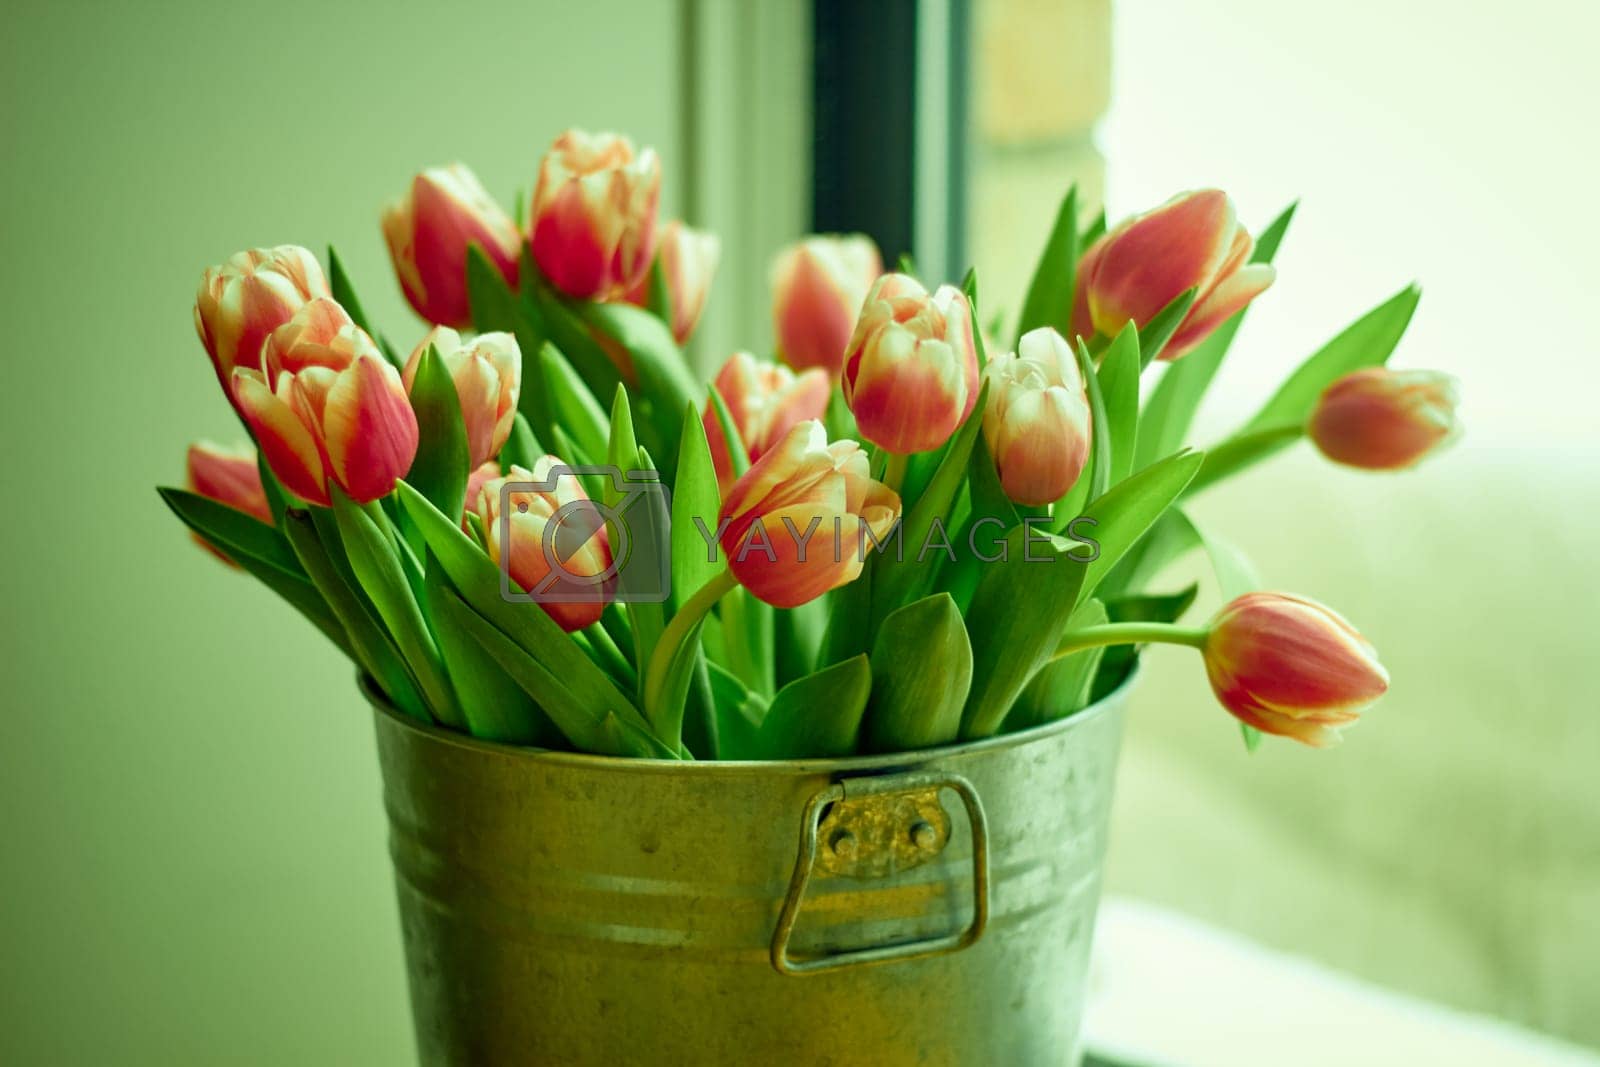 Royalty free image of bouquet tulip flowers in a metal bucket is by electrovenik